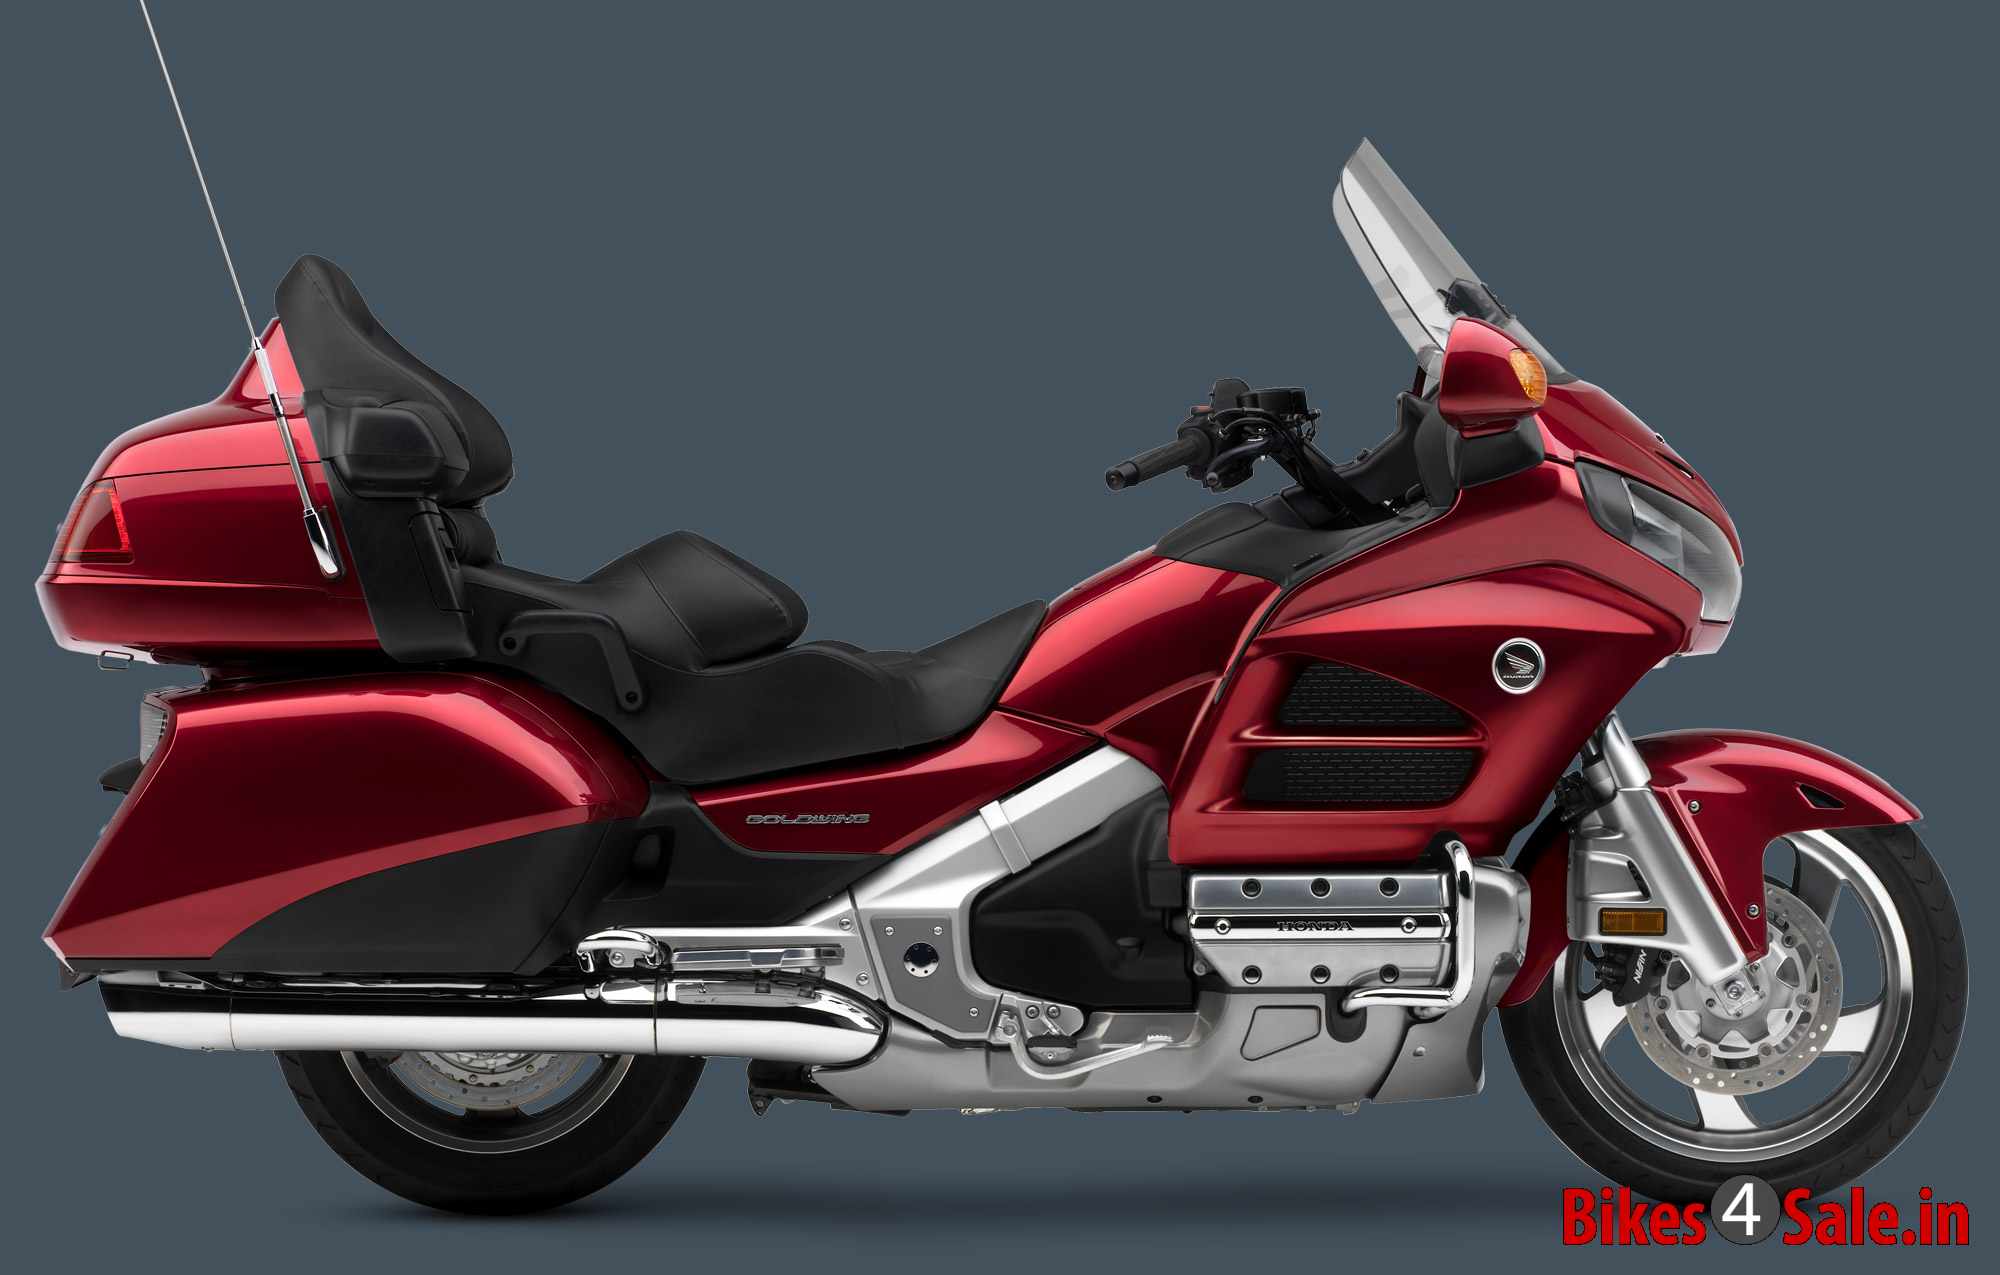 Honda Gold Wing GL1800 - Candy Red Colour